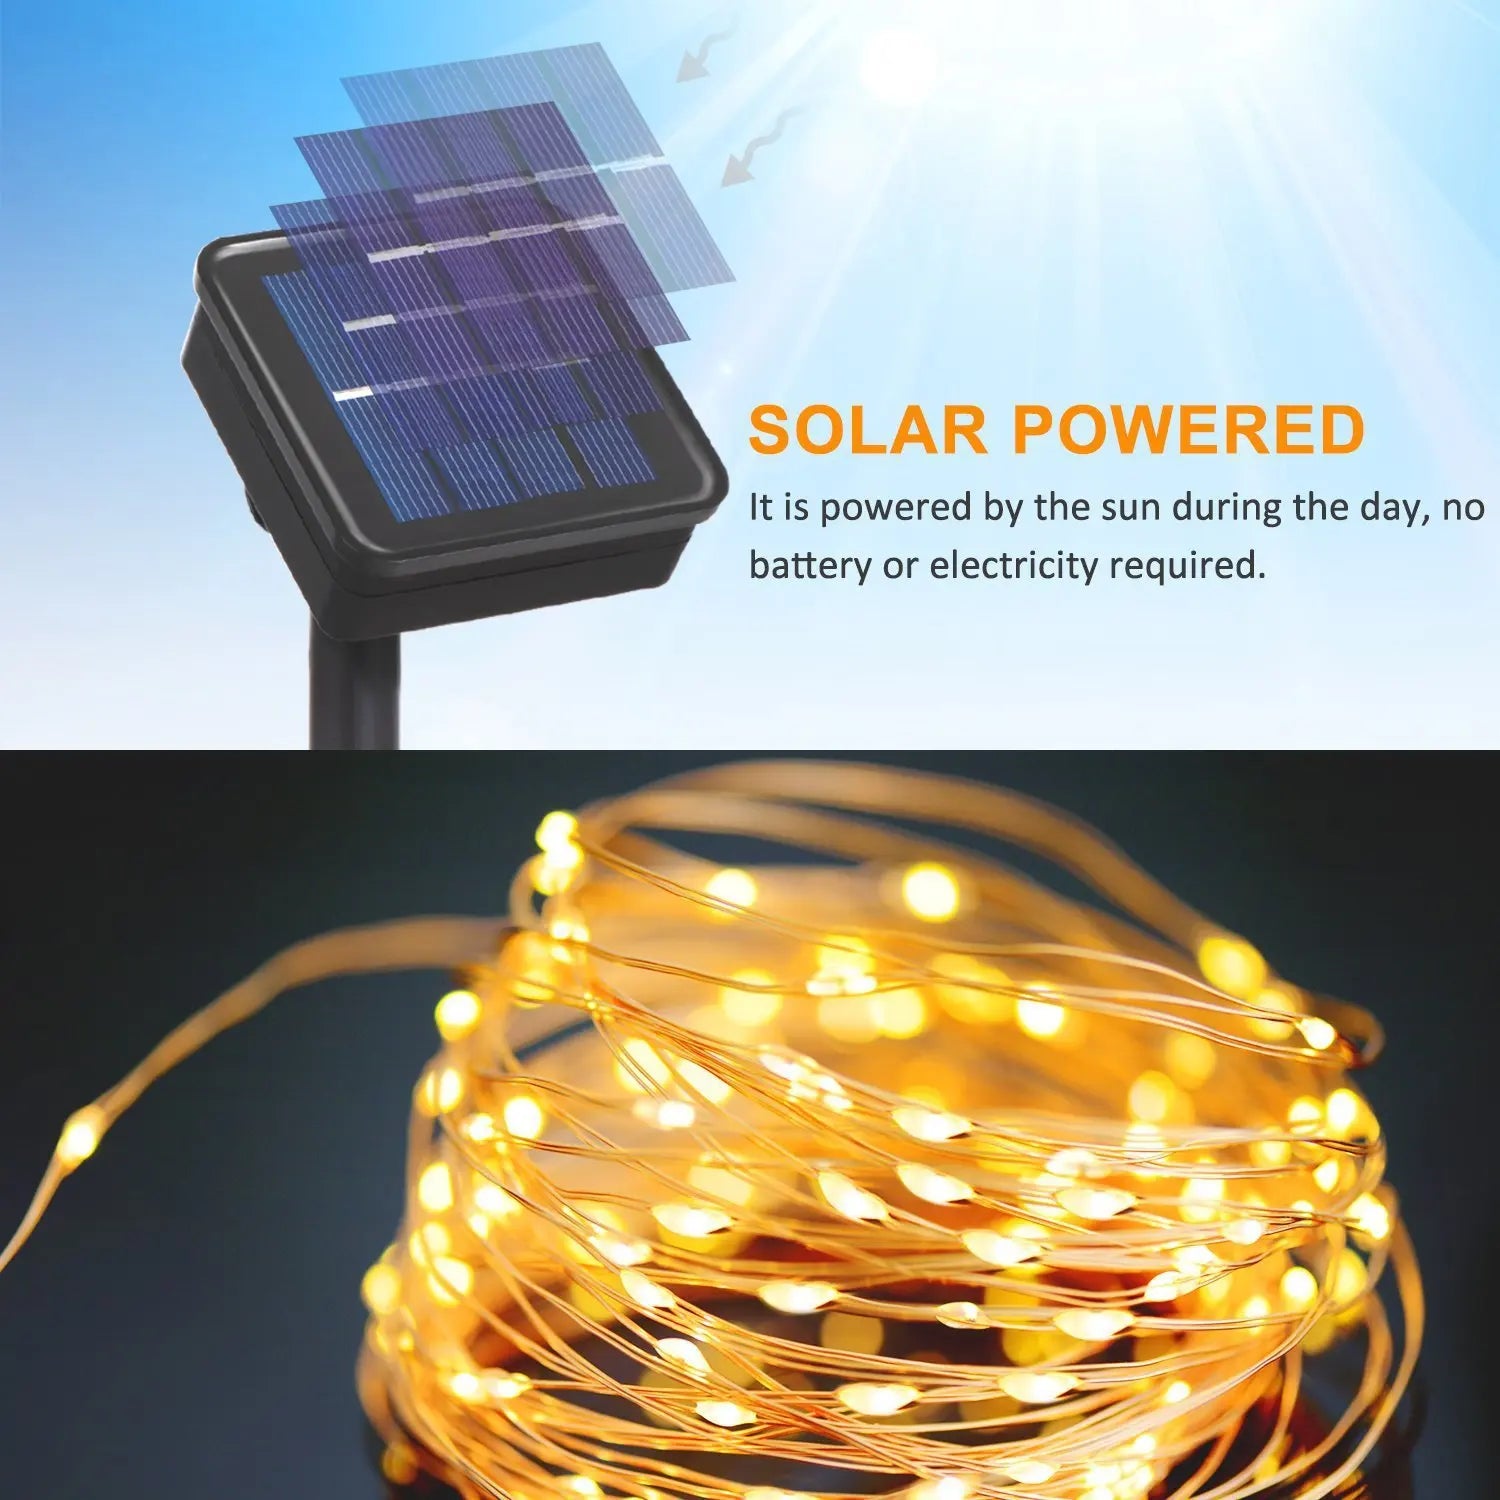 LED Solar Fairy Light, Solar-powered lamp for outdoor use, requiring no batteries or electricity.